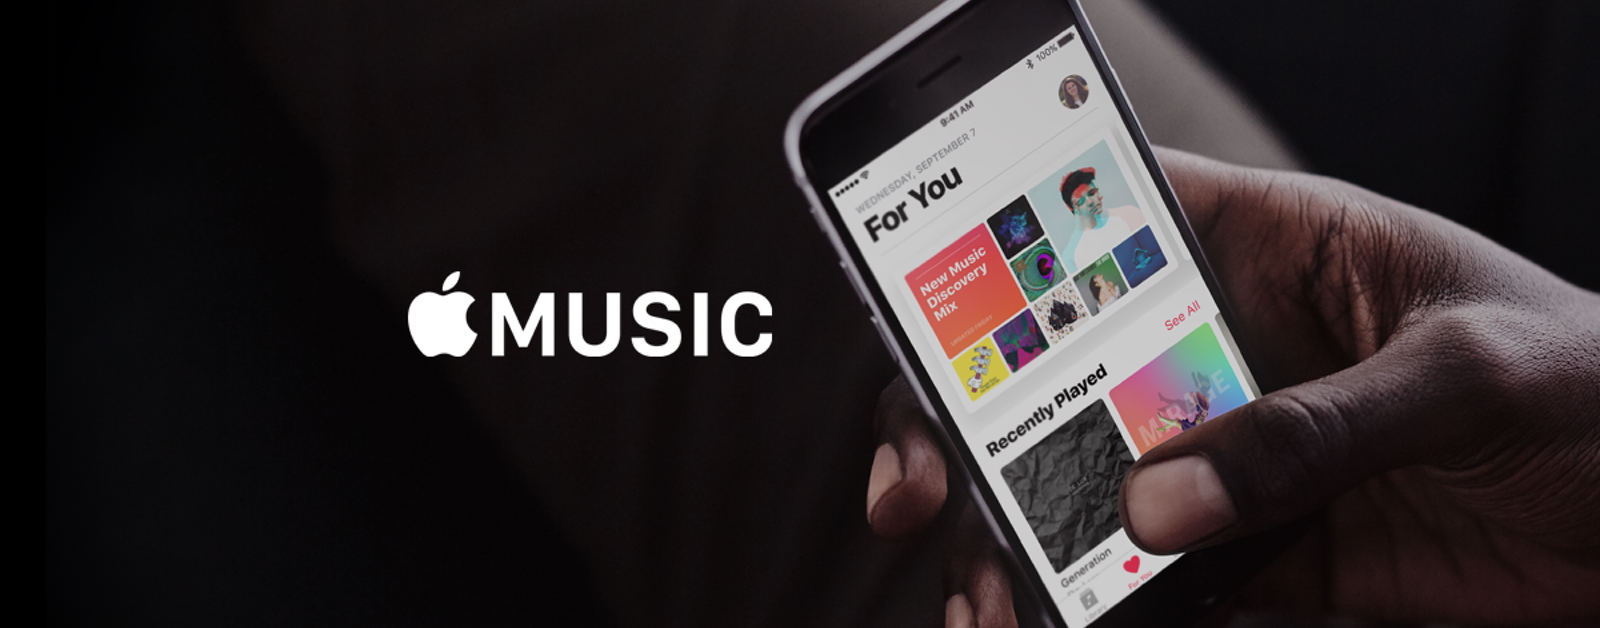 Apple Music Is Turning Apple into a Media Giant